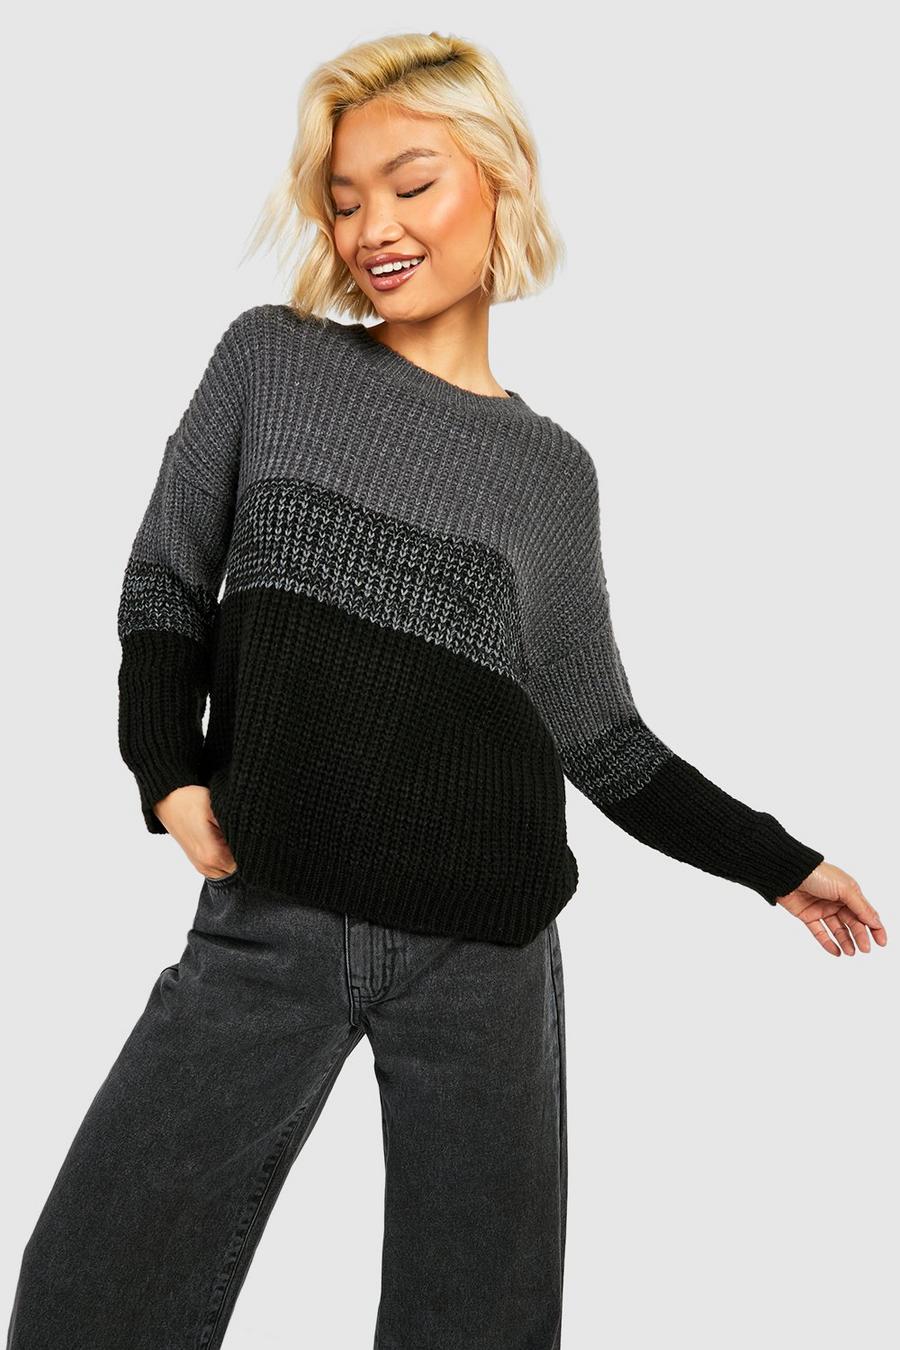 Black Ombre Sweater